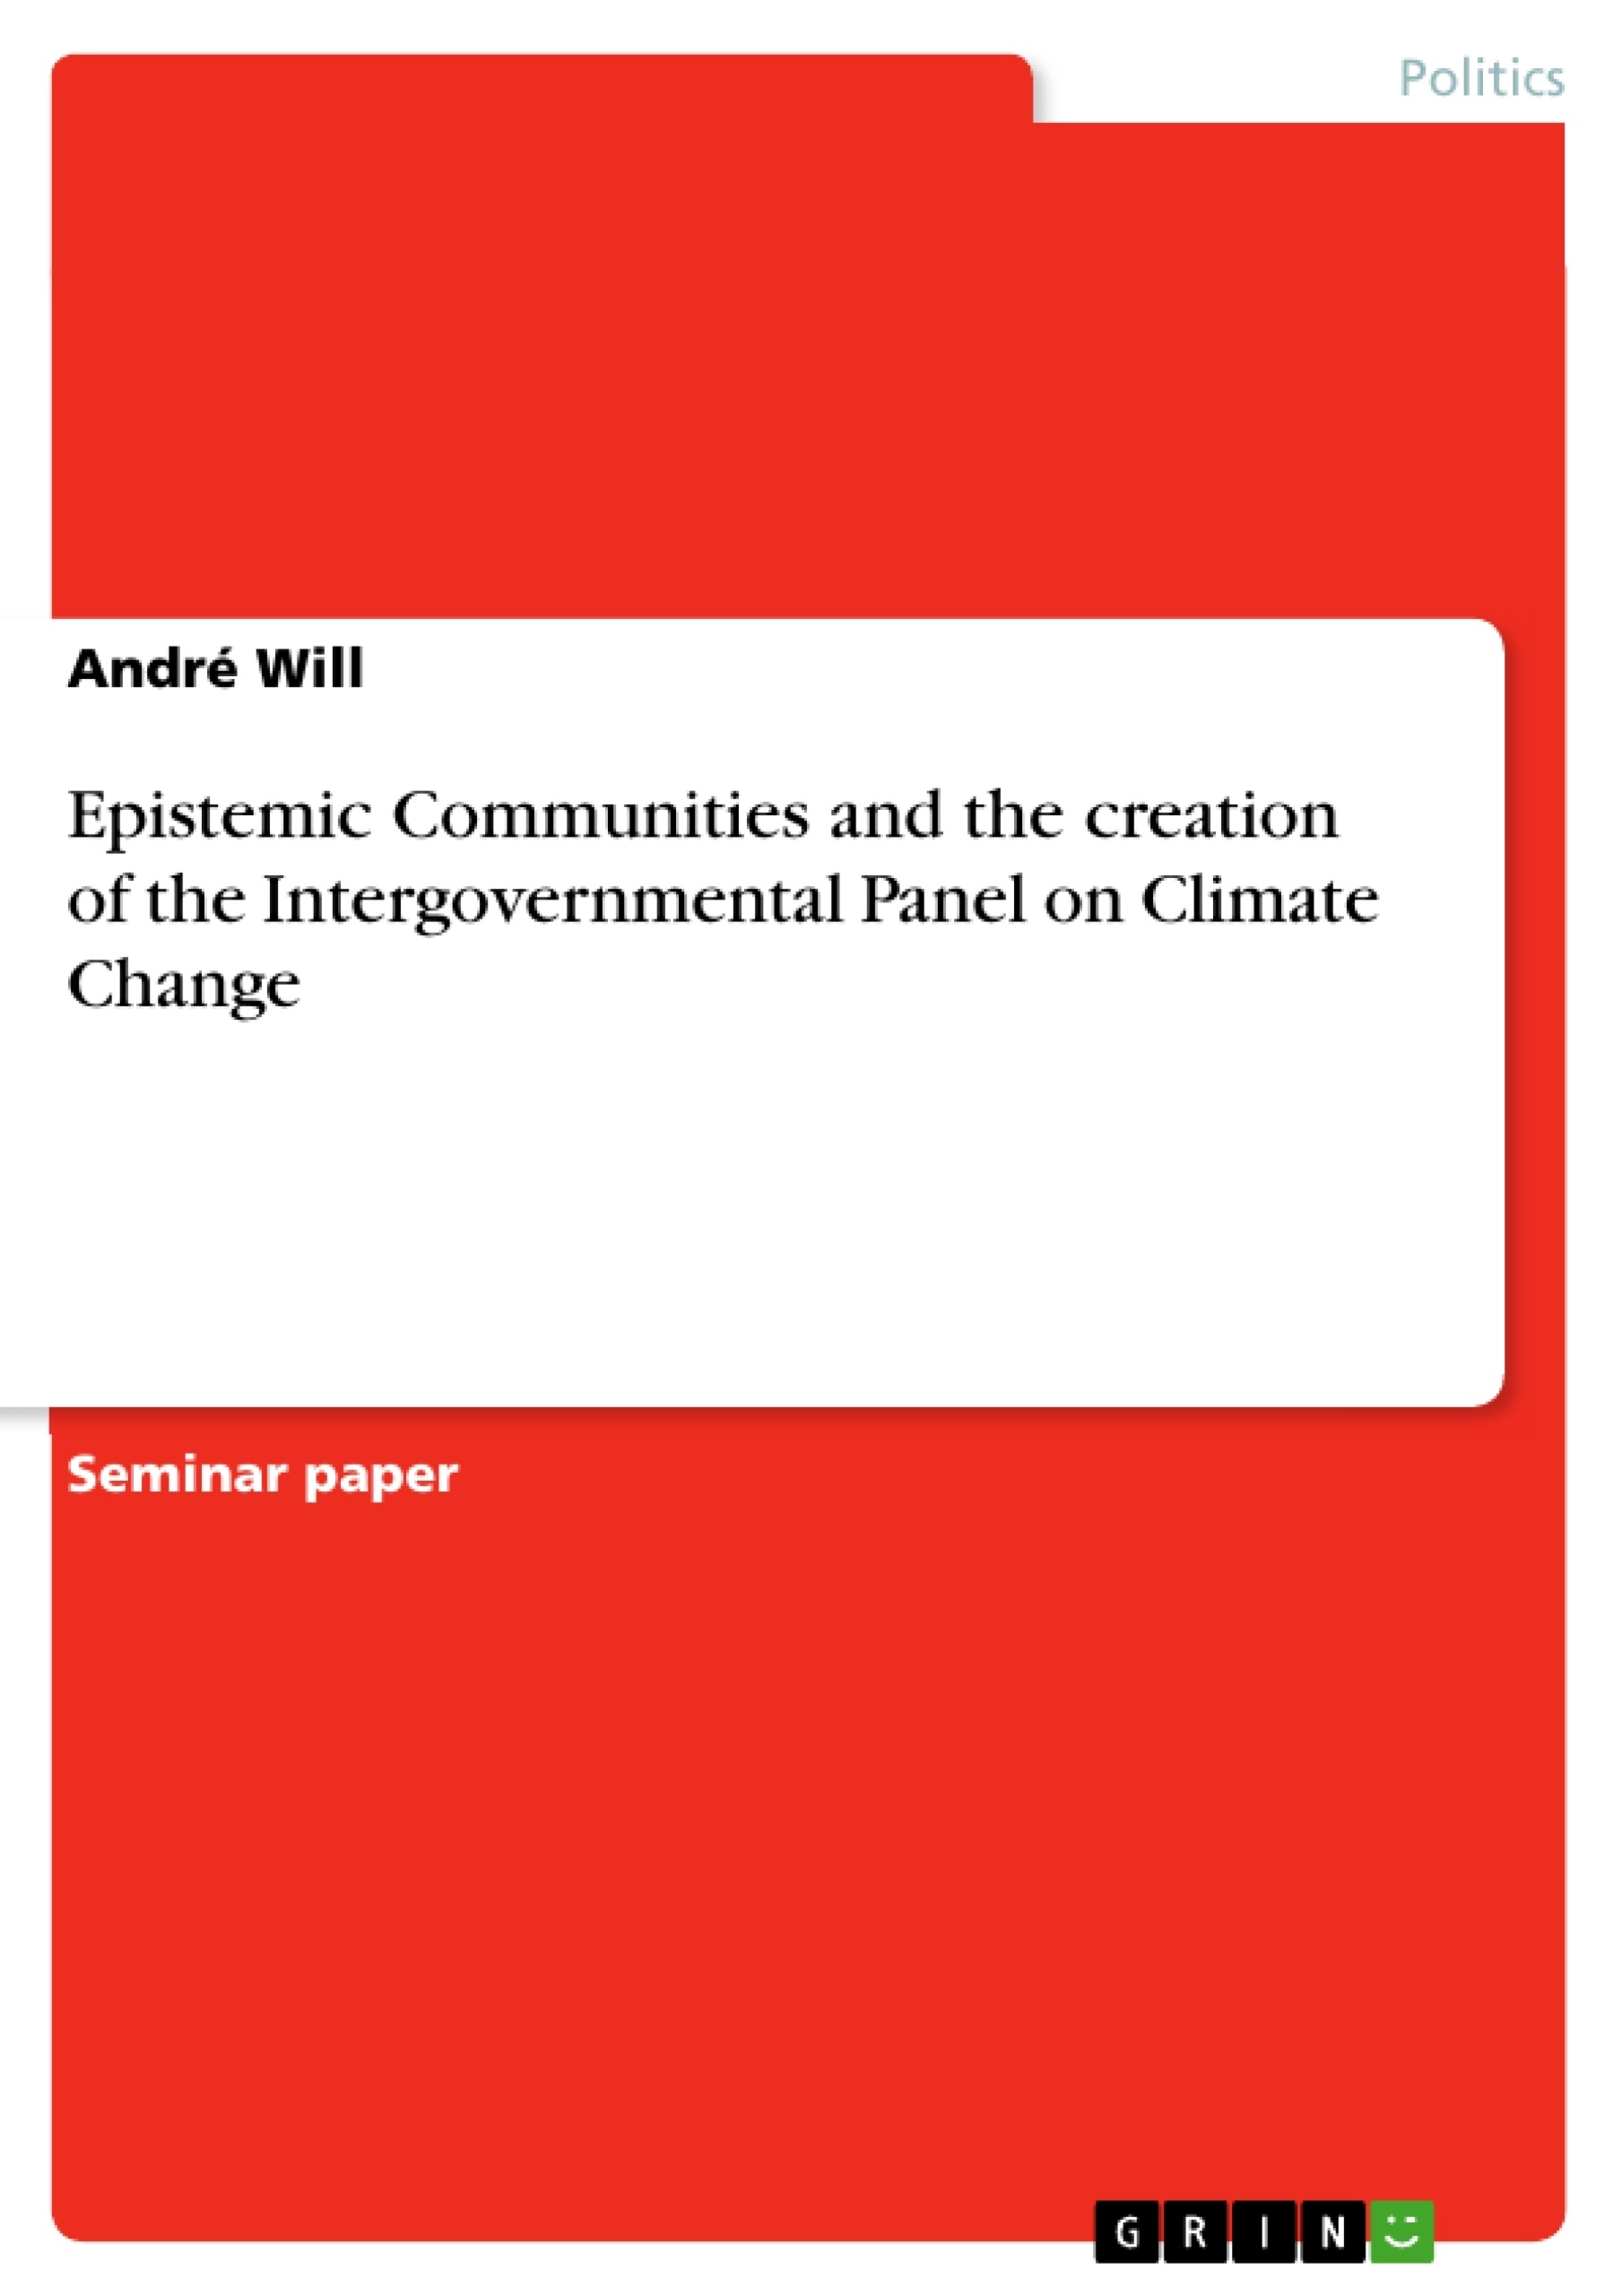 Título: Epistemic Communities and the creation of the Intergovernmental Panel on Climate Change